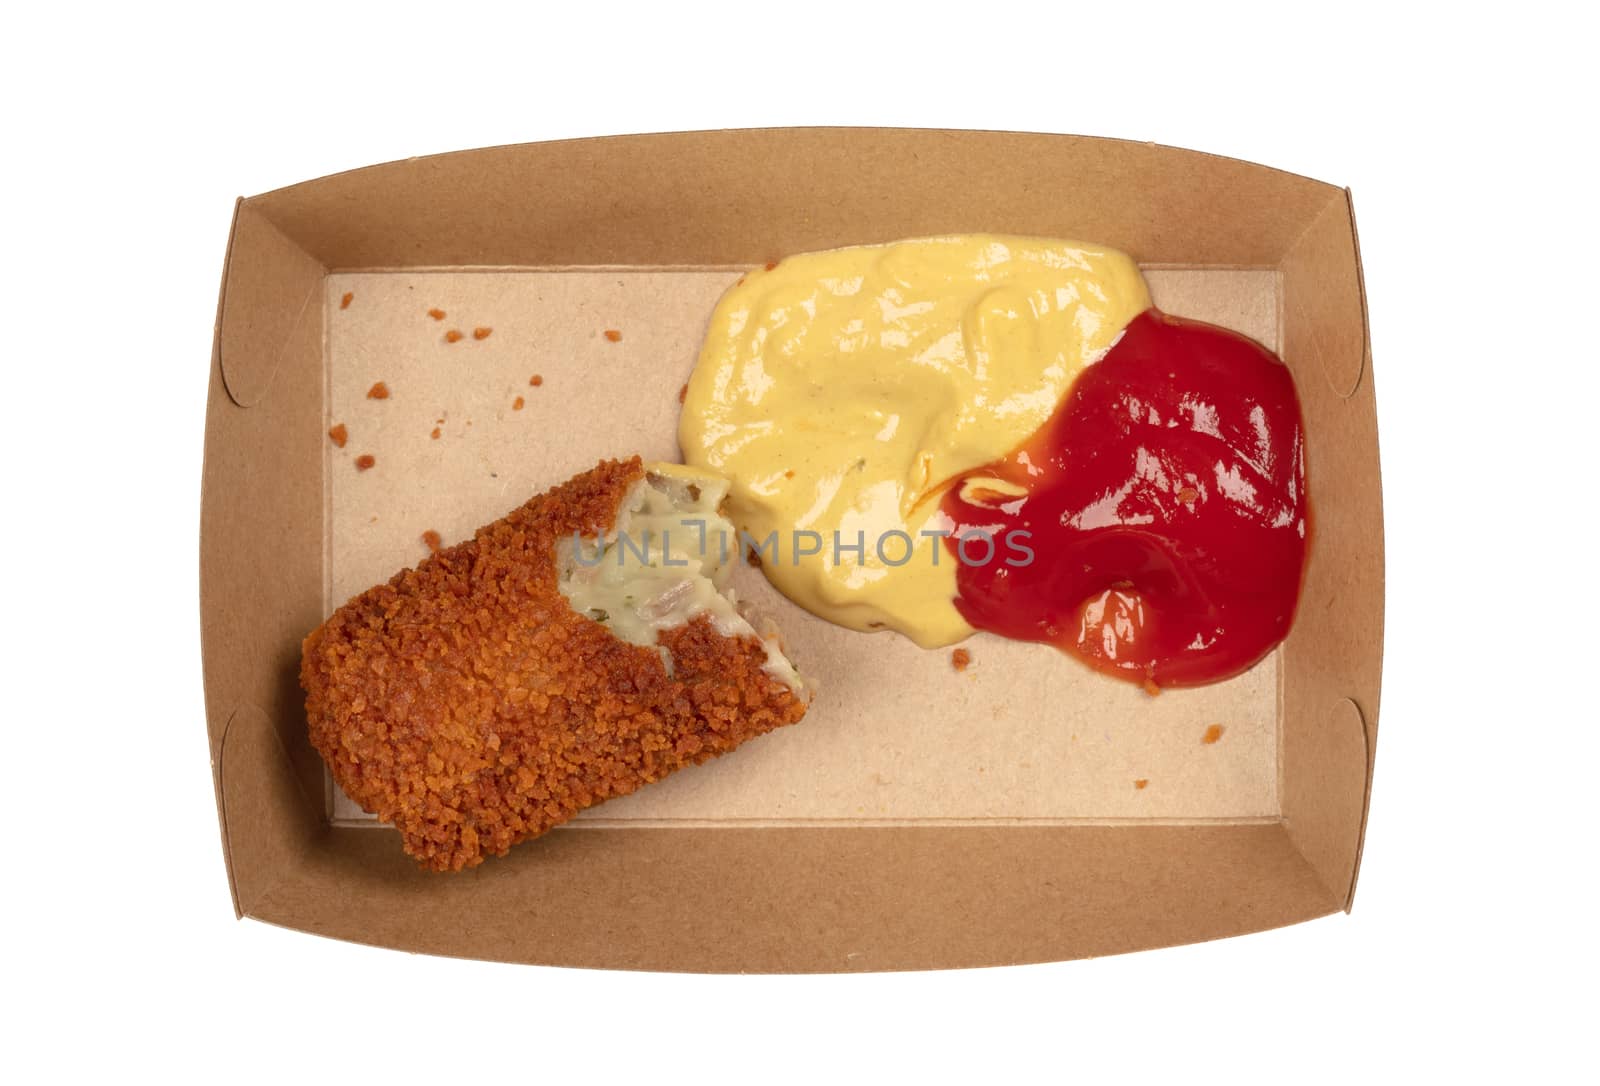 Partly eaten brown crusty dutch kroket with mustard and ketchup  by michaklootwijk